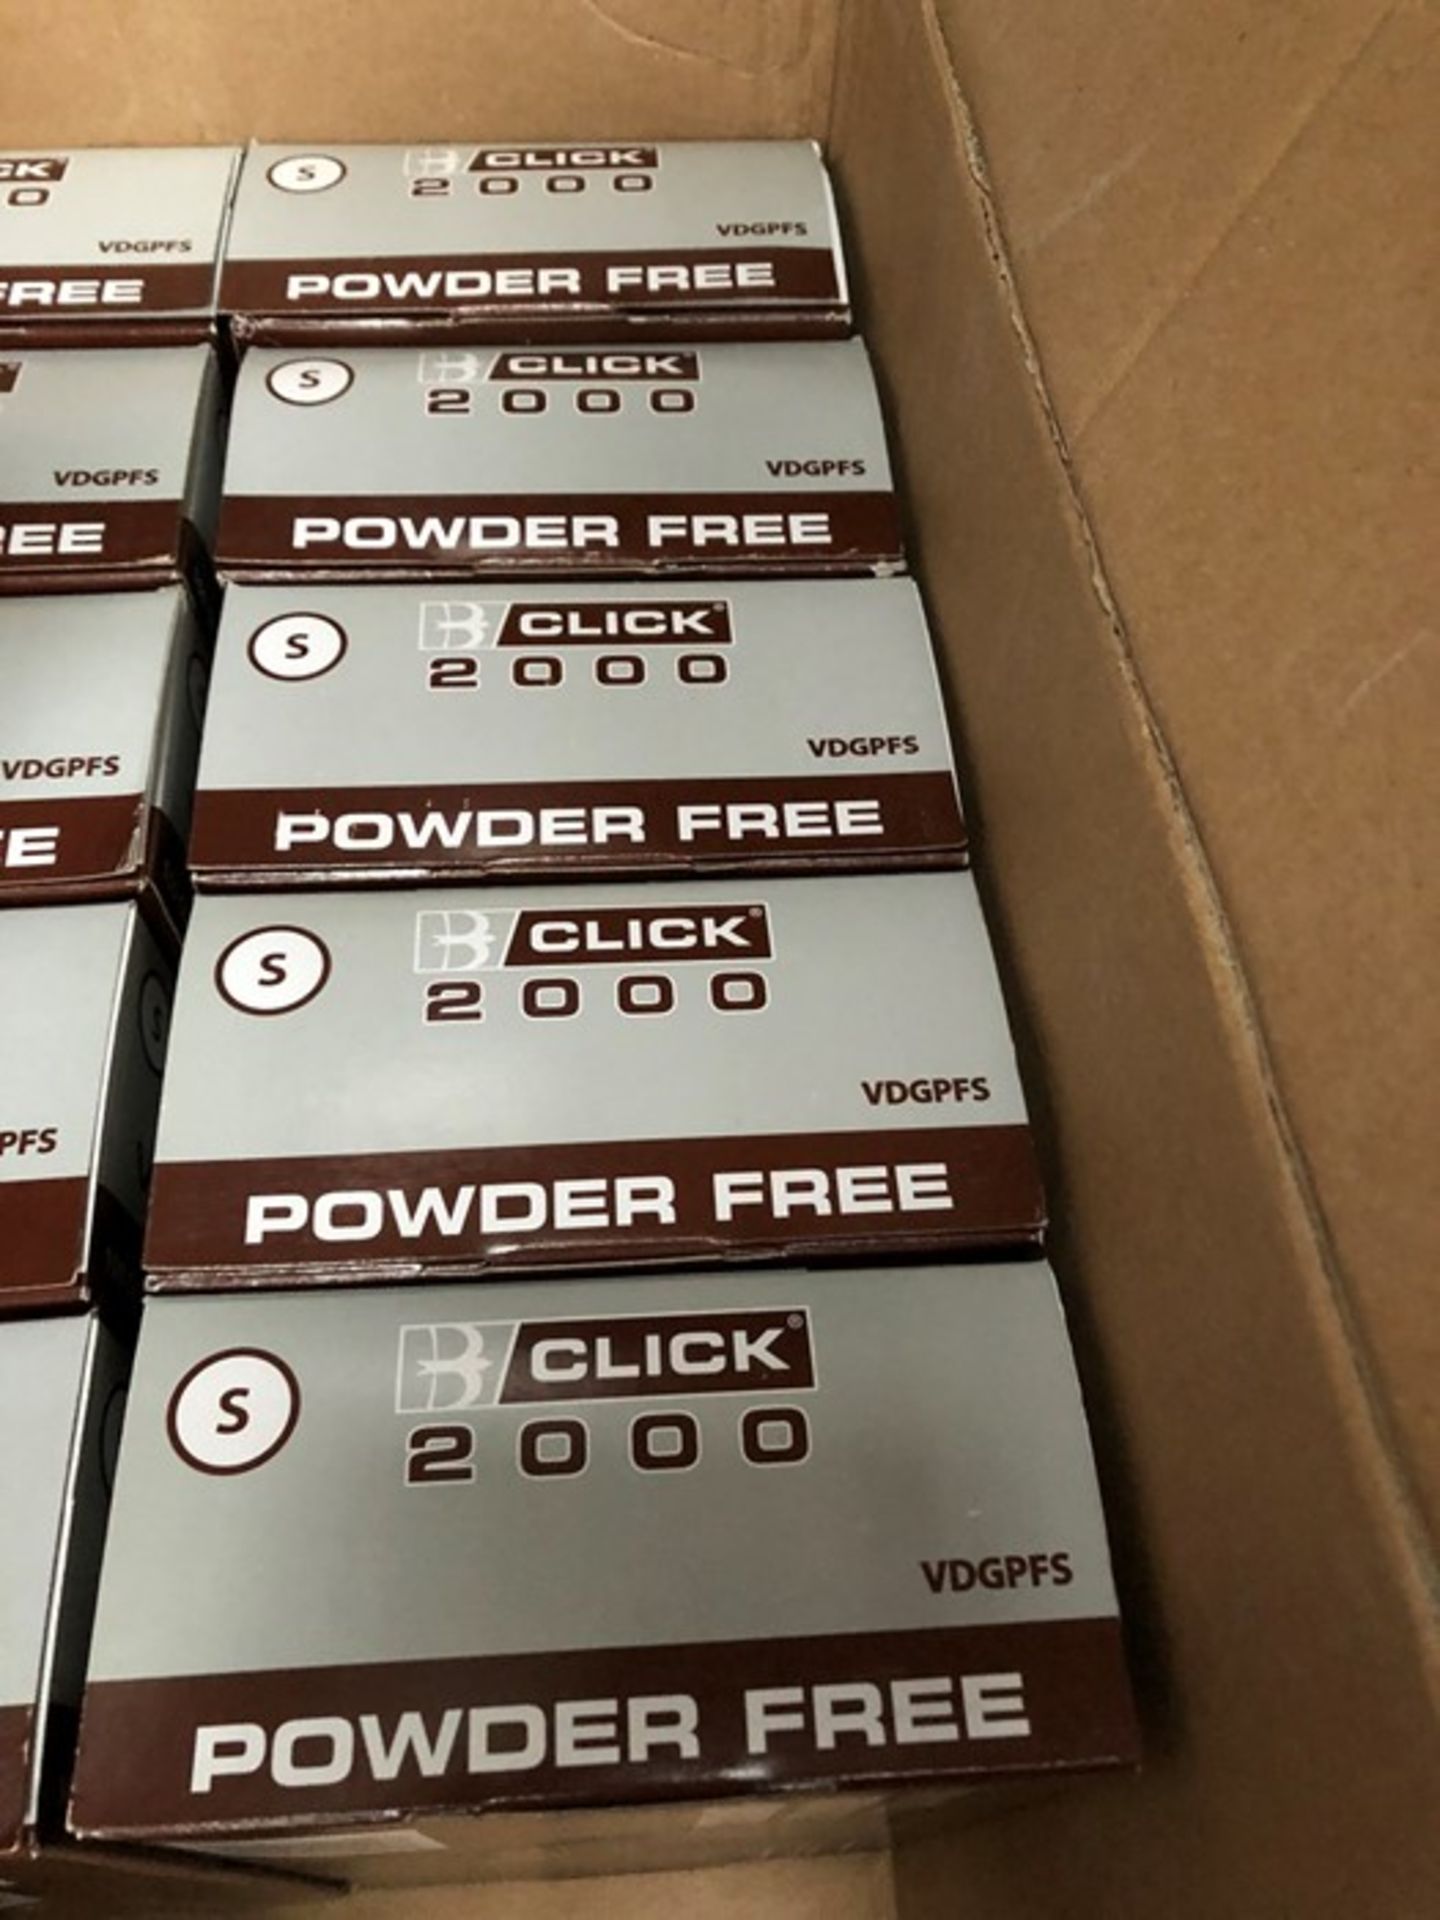 1 LOT TO CONTAIN 5 BOXES OF CLICK 2000 VINYL DISPOSABLE GLOVES POWDER FREE / SIZE: S (PUBLIC VIEWING